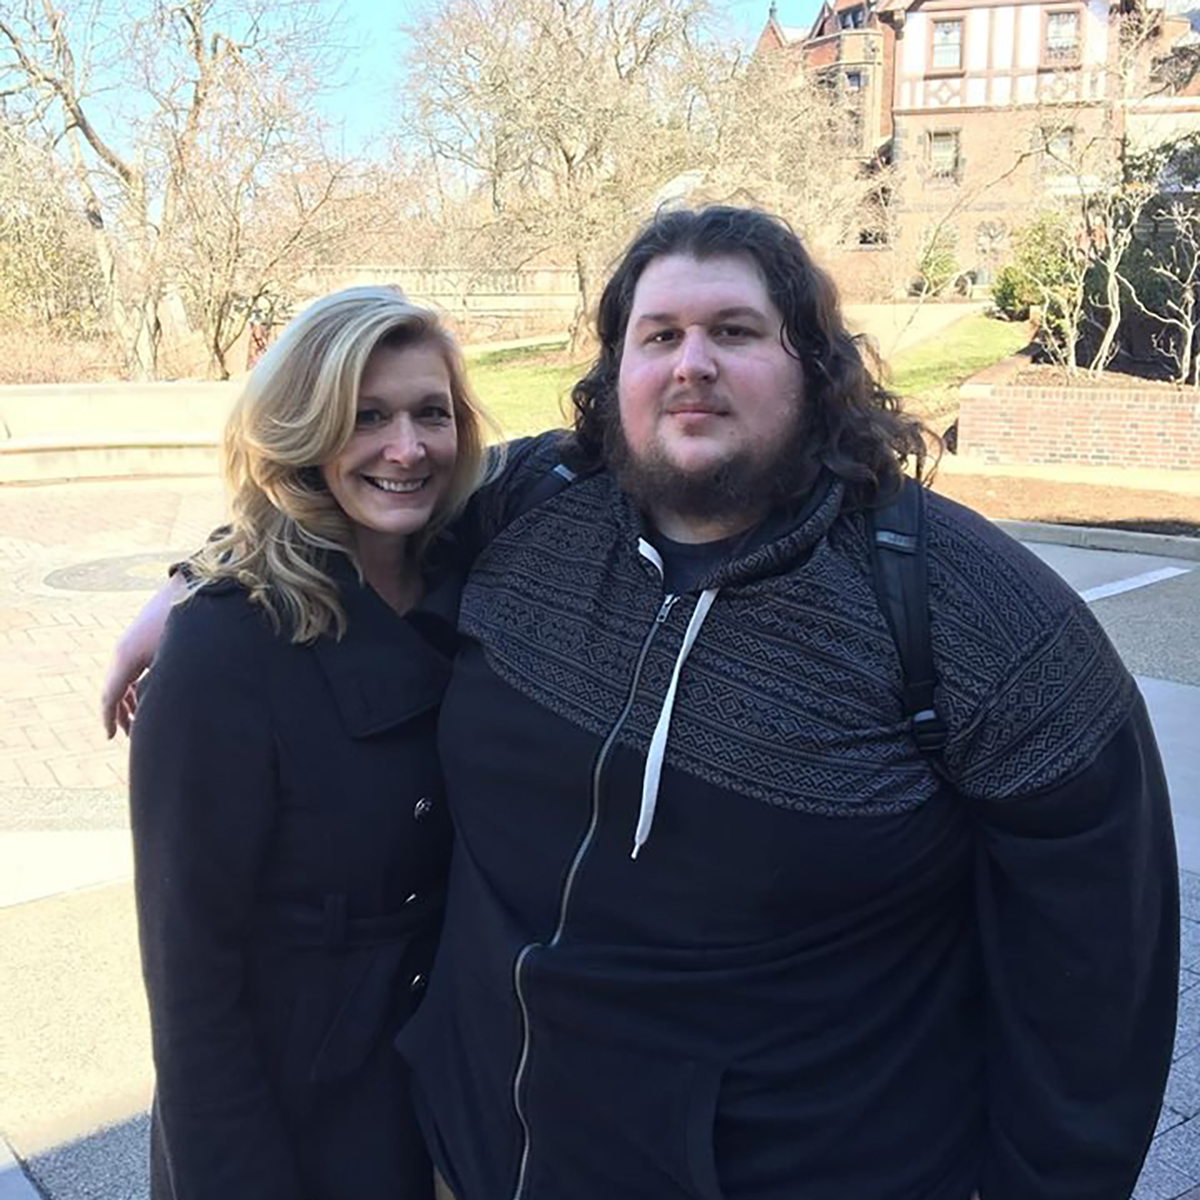 Photo of Christopher posing with a woman on Shadyside Campus